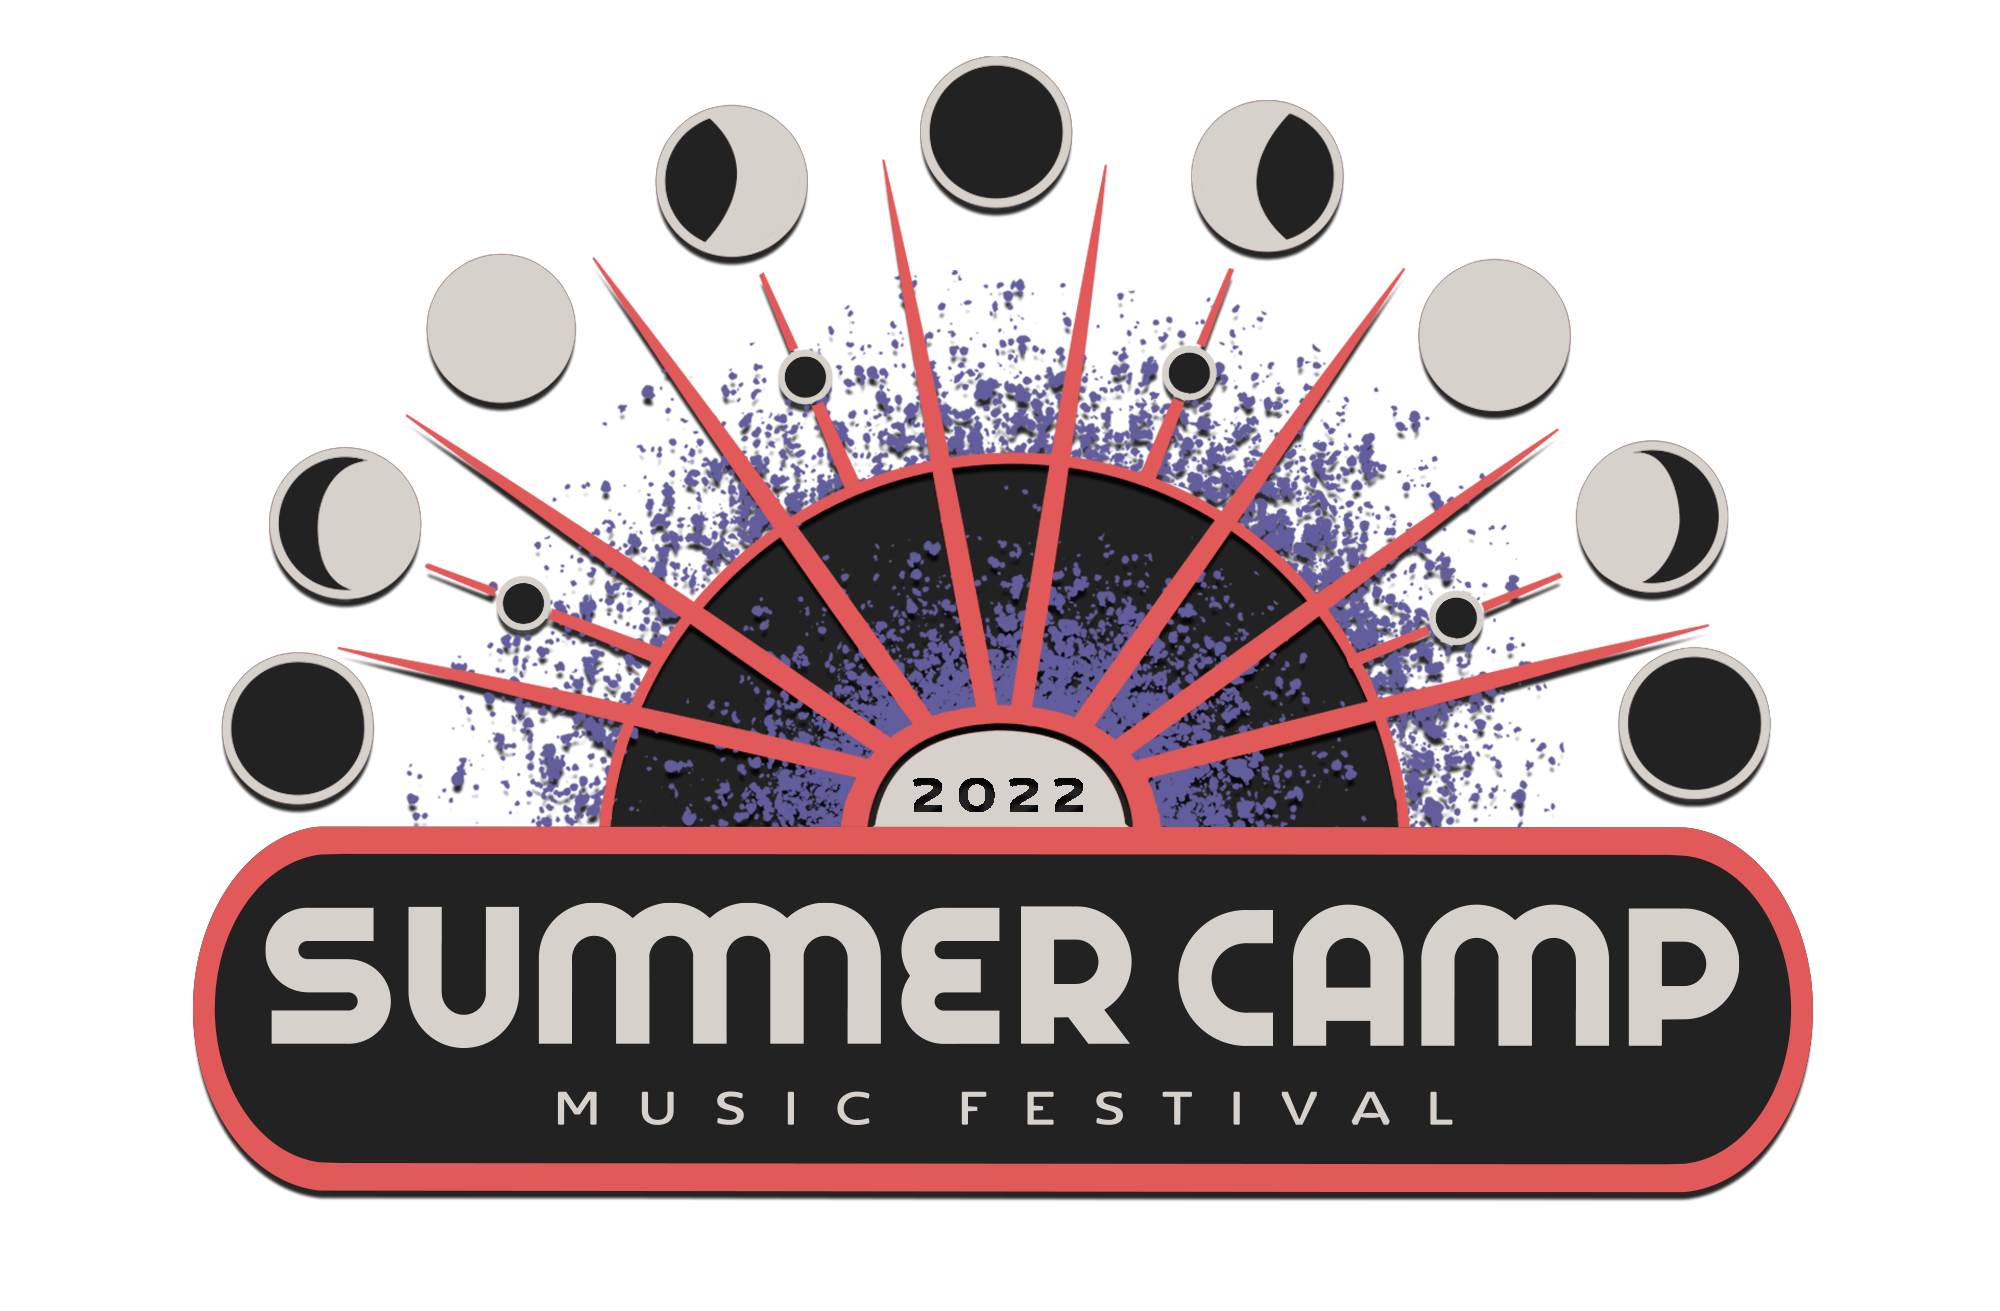 ABOUT Summer Camp Music Festival Summer Camp Music Festival